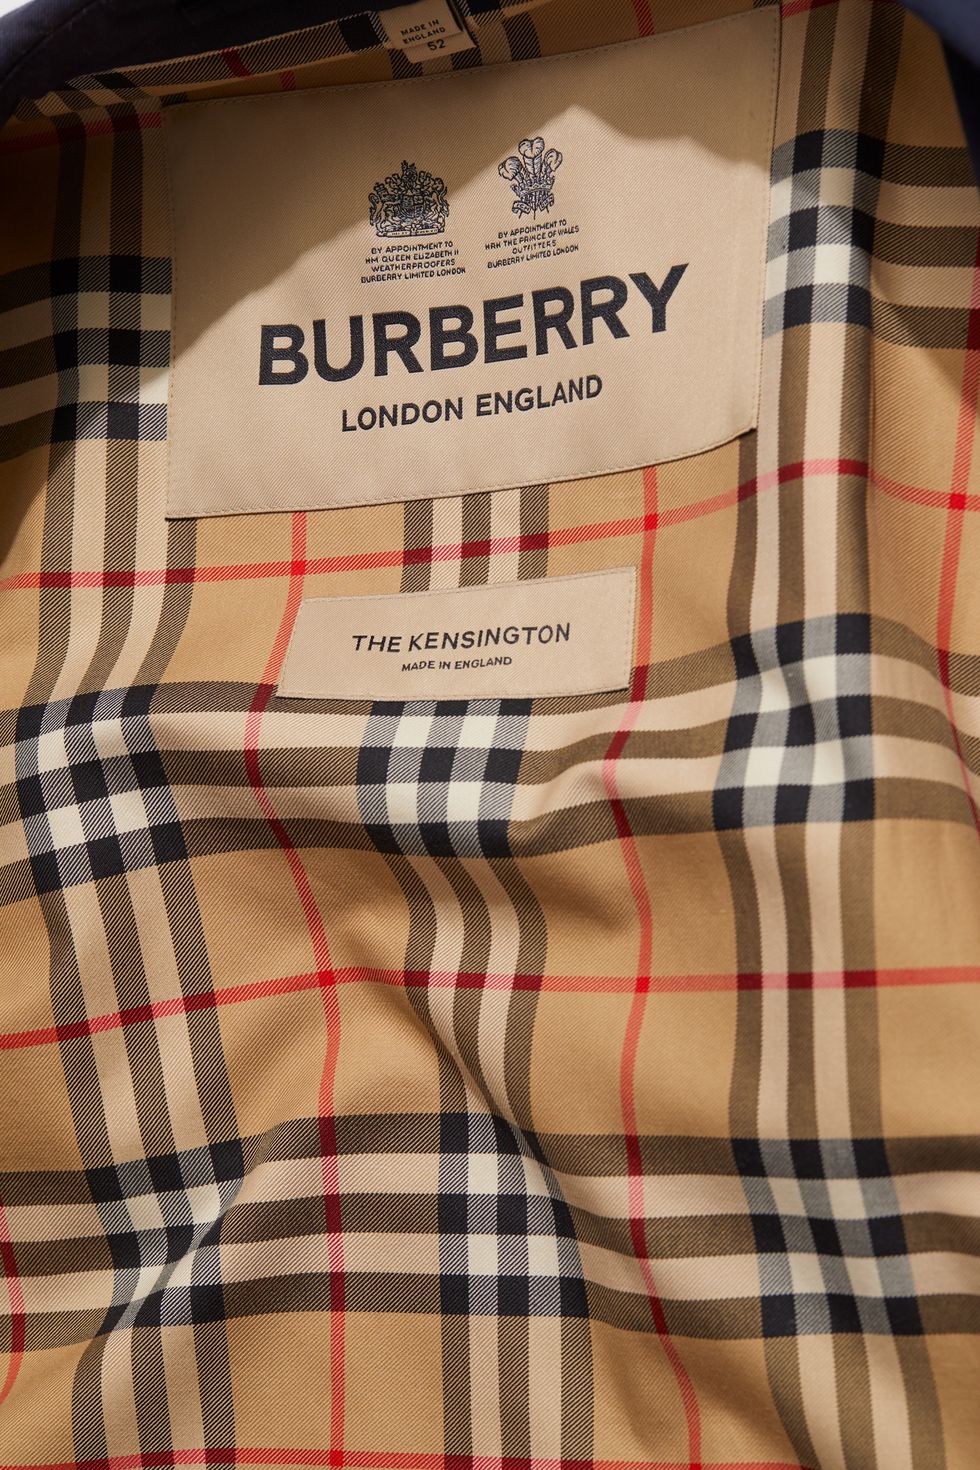 Ansættelse Erhvervelse Celebrity The Burberry Trench Is an Icon—and Rightfully So